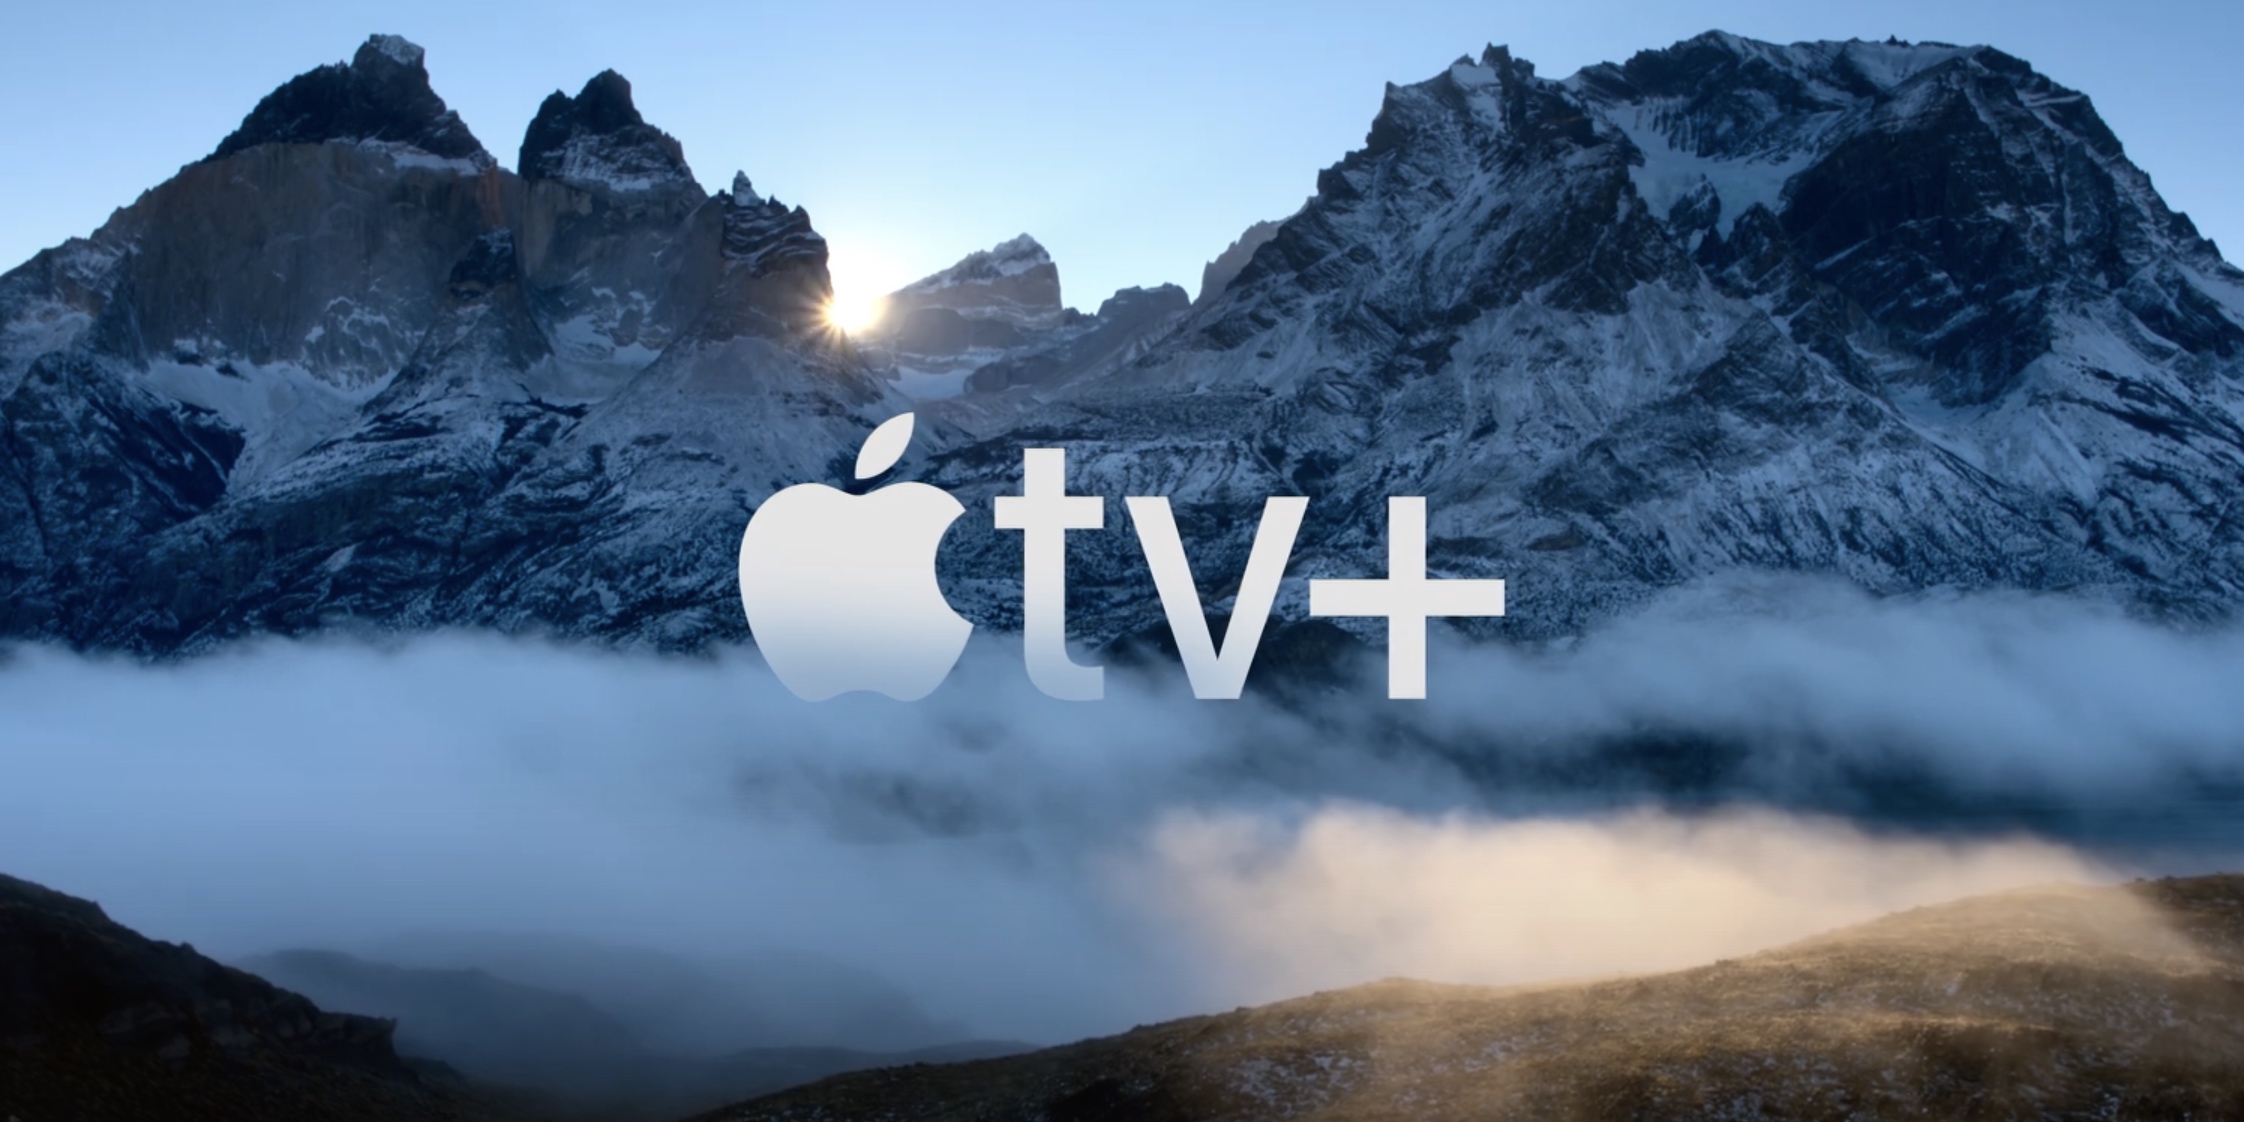 UK government wants to regulate Apple TV+, Netflix, and other streaming services